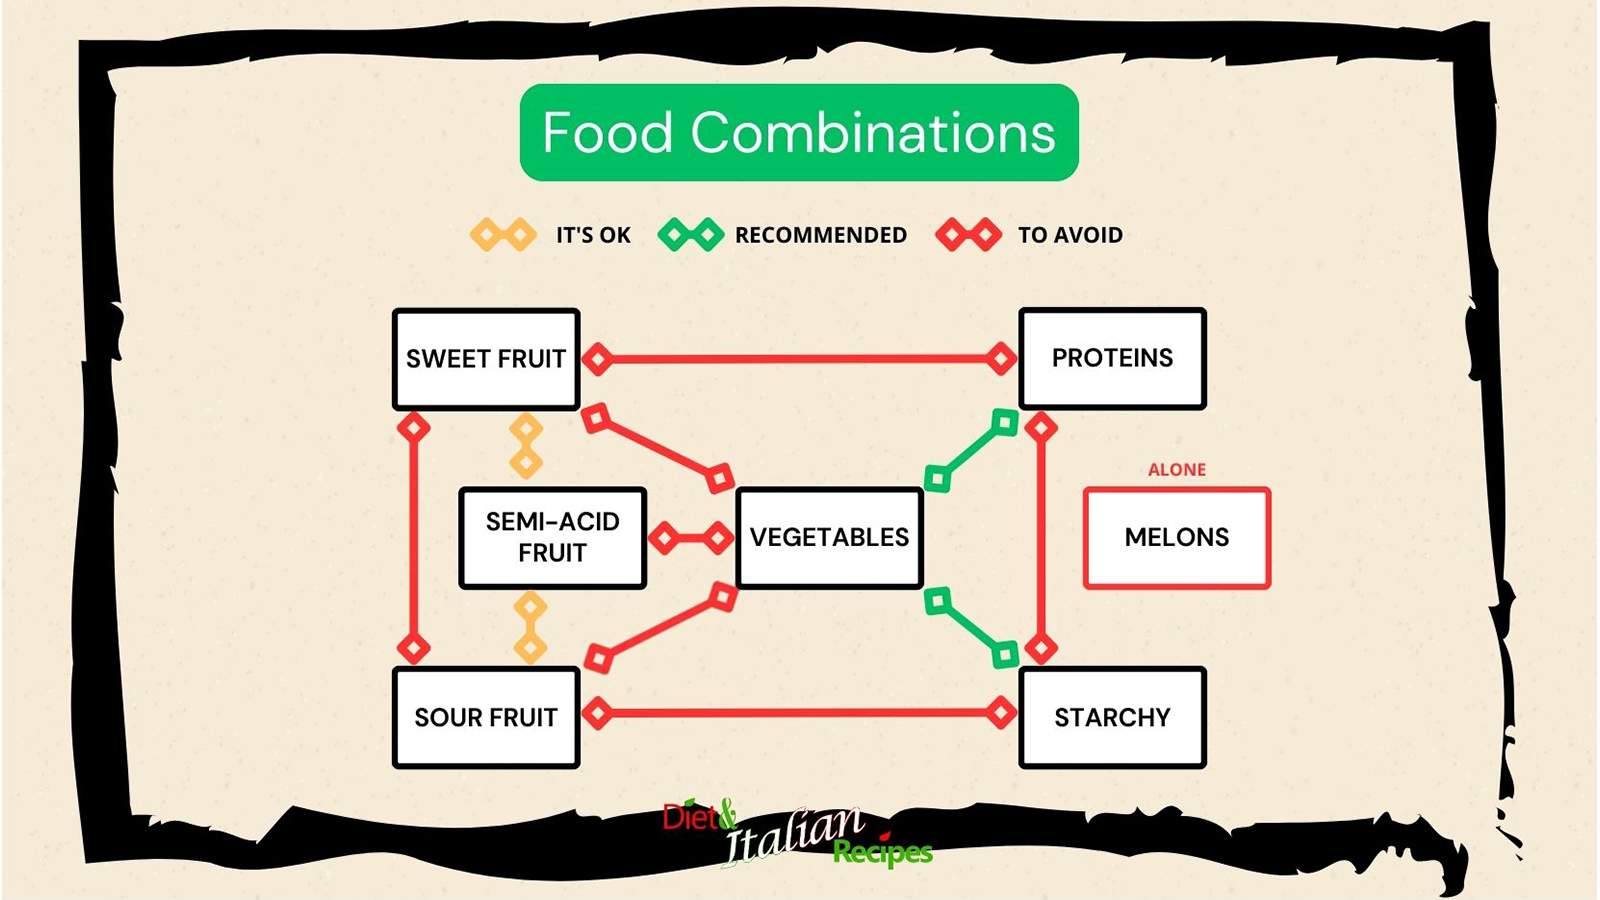 food combinations dissociated diet table